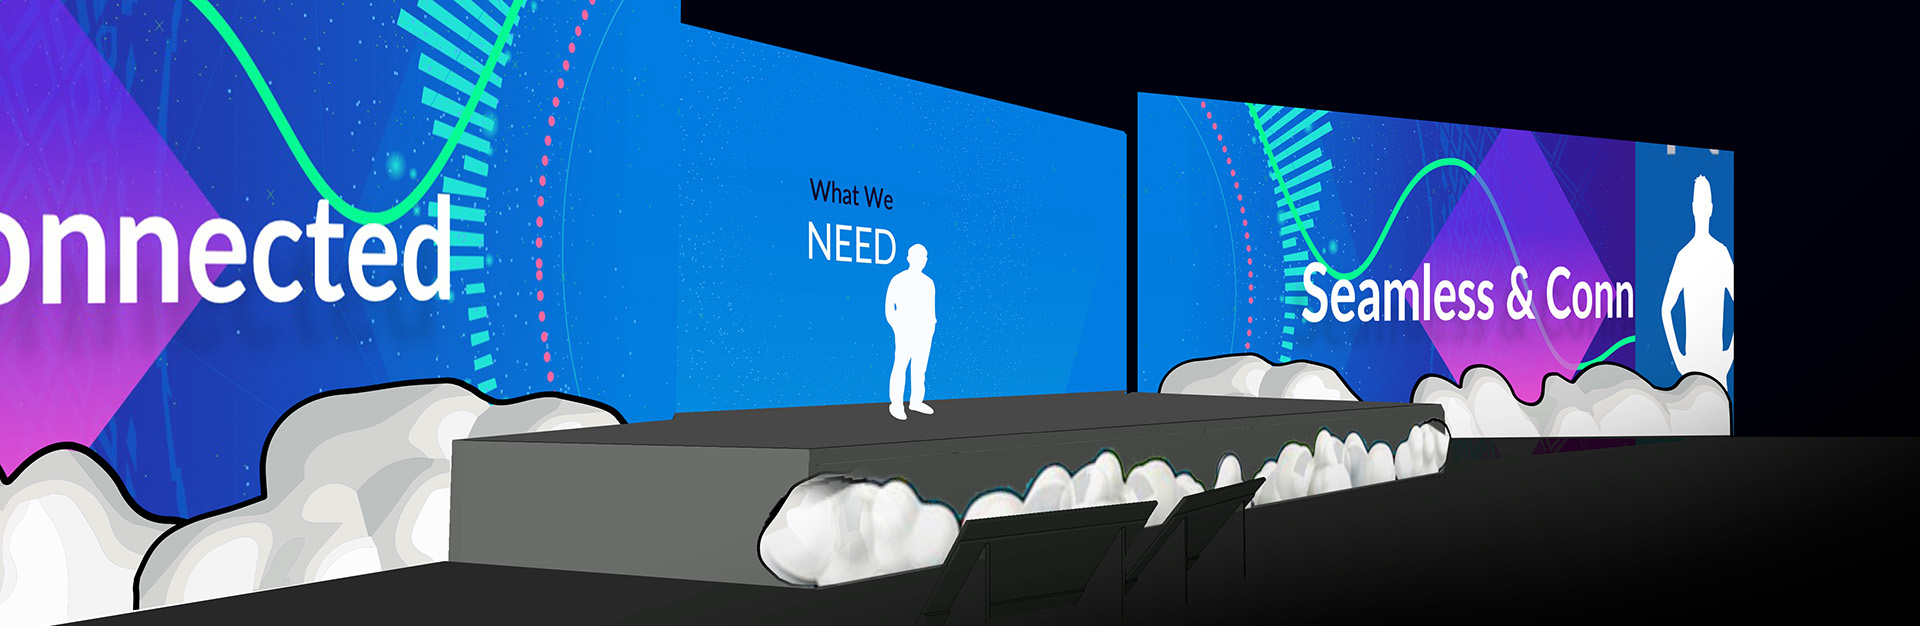 A stage mockup of the three screen set up from 2019 DevOps World Jenkins World event. It depicts the cloudbees connected platform.